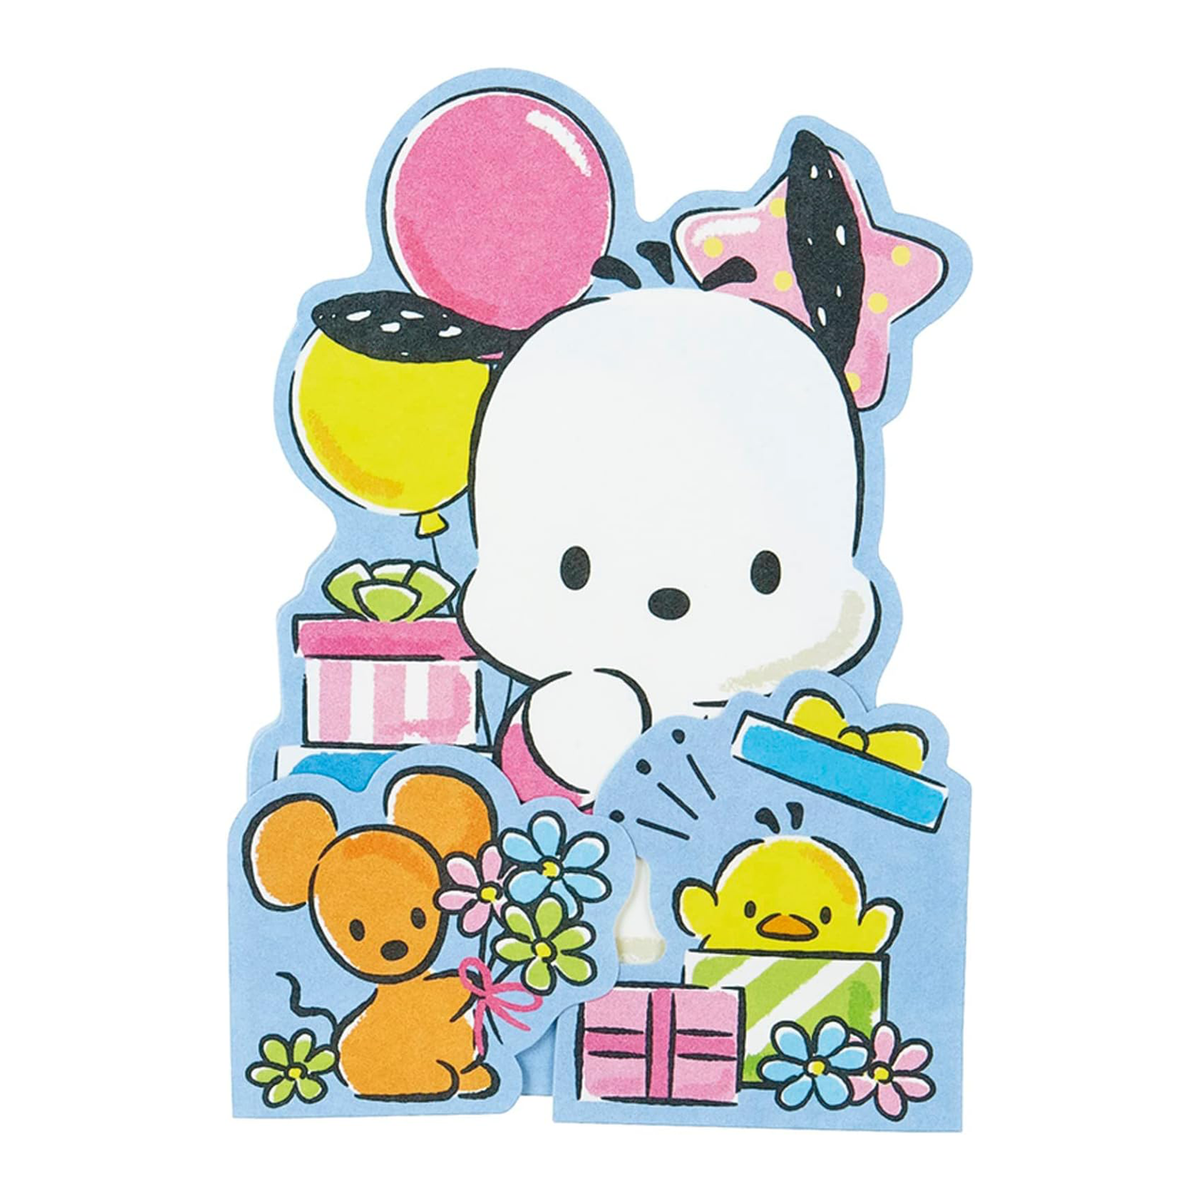 Pochacco Stickers And Greeting Card Small Gift Series